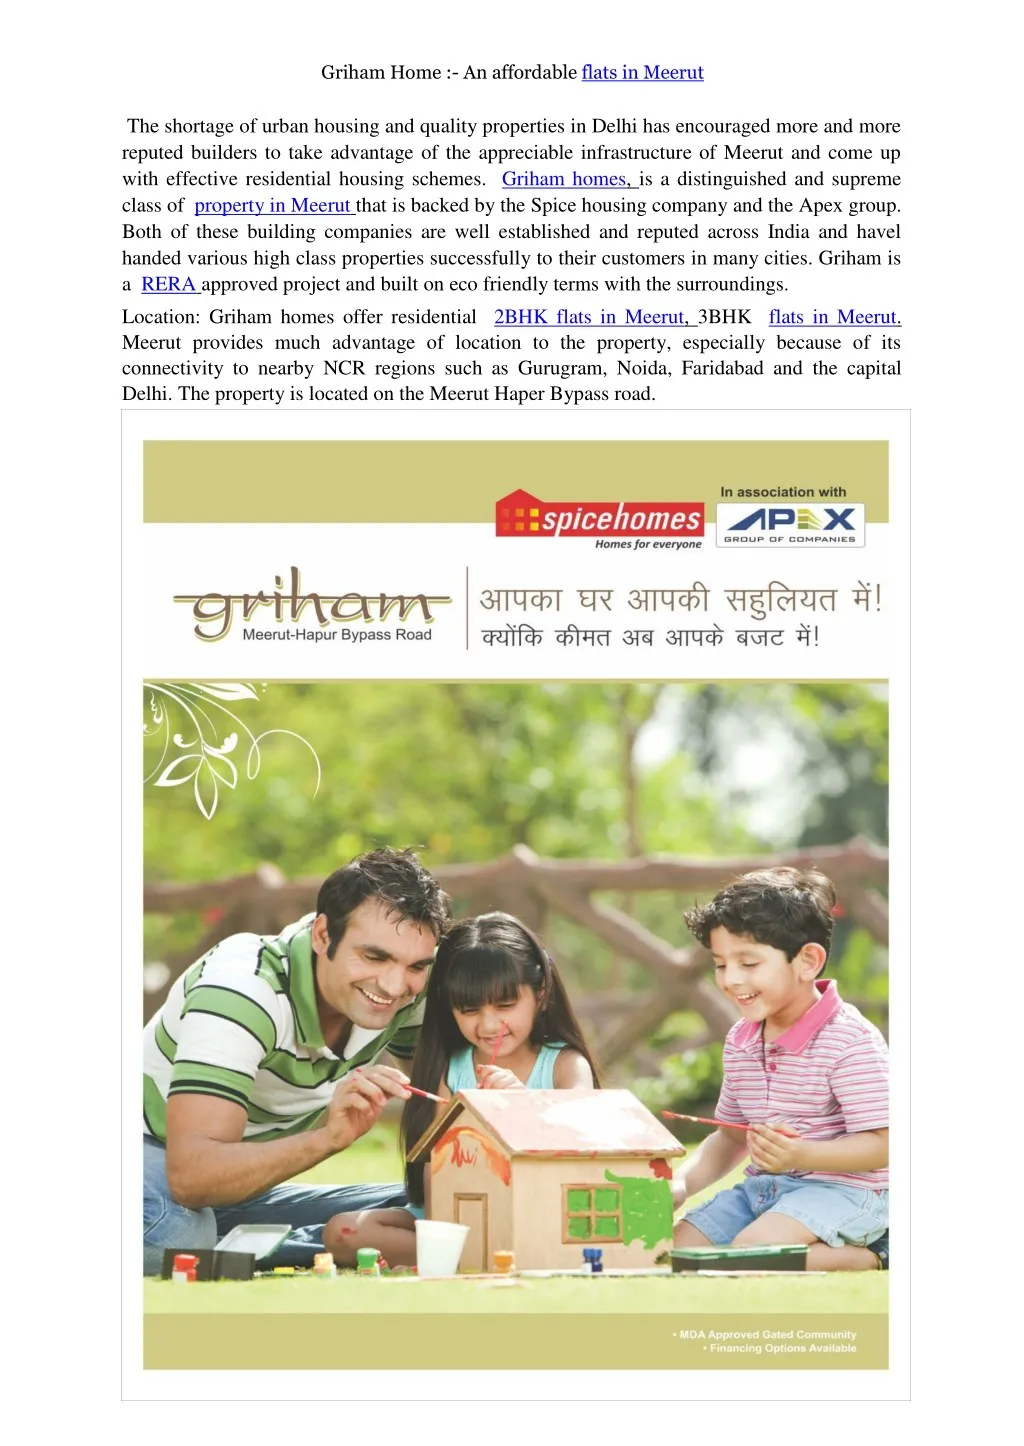 griham home an affordable flats in meerut